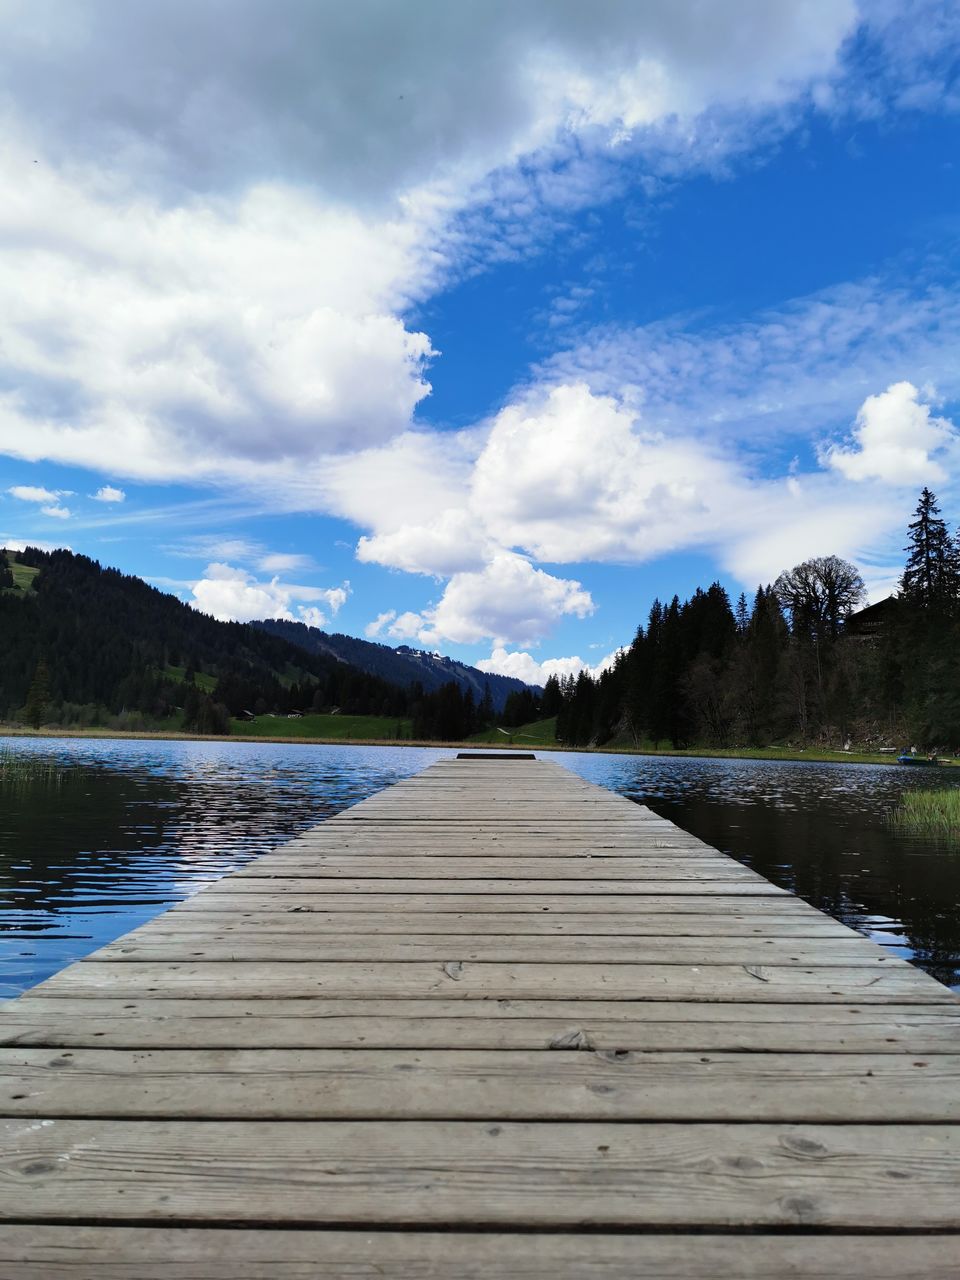 VIEW OF PIER ON LAKE AGAINST SKY